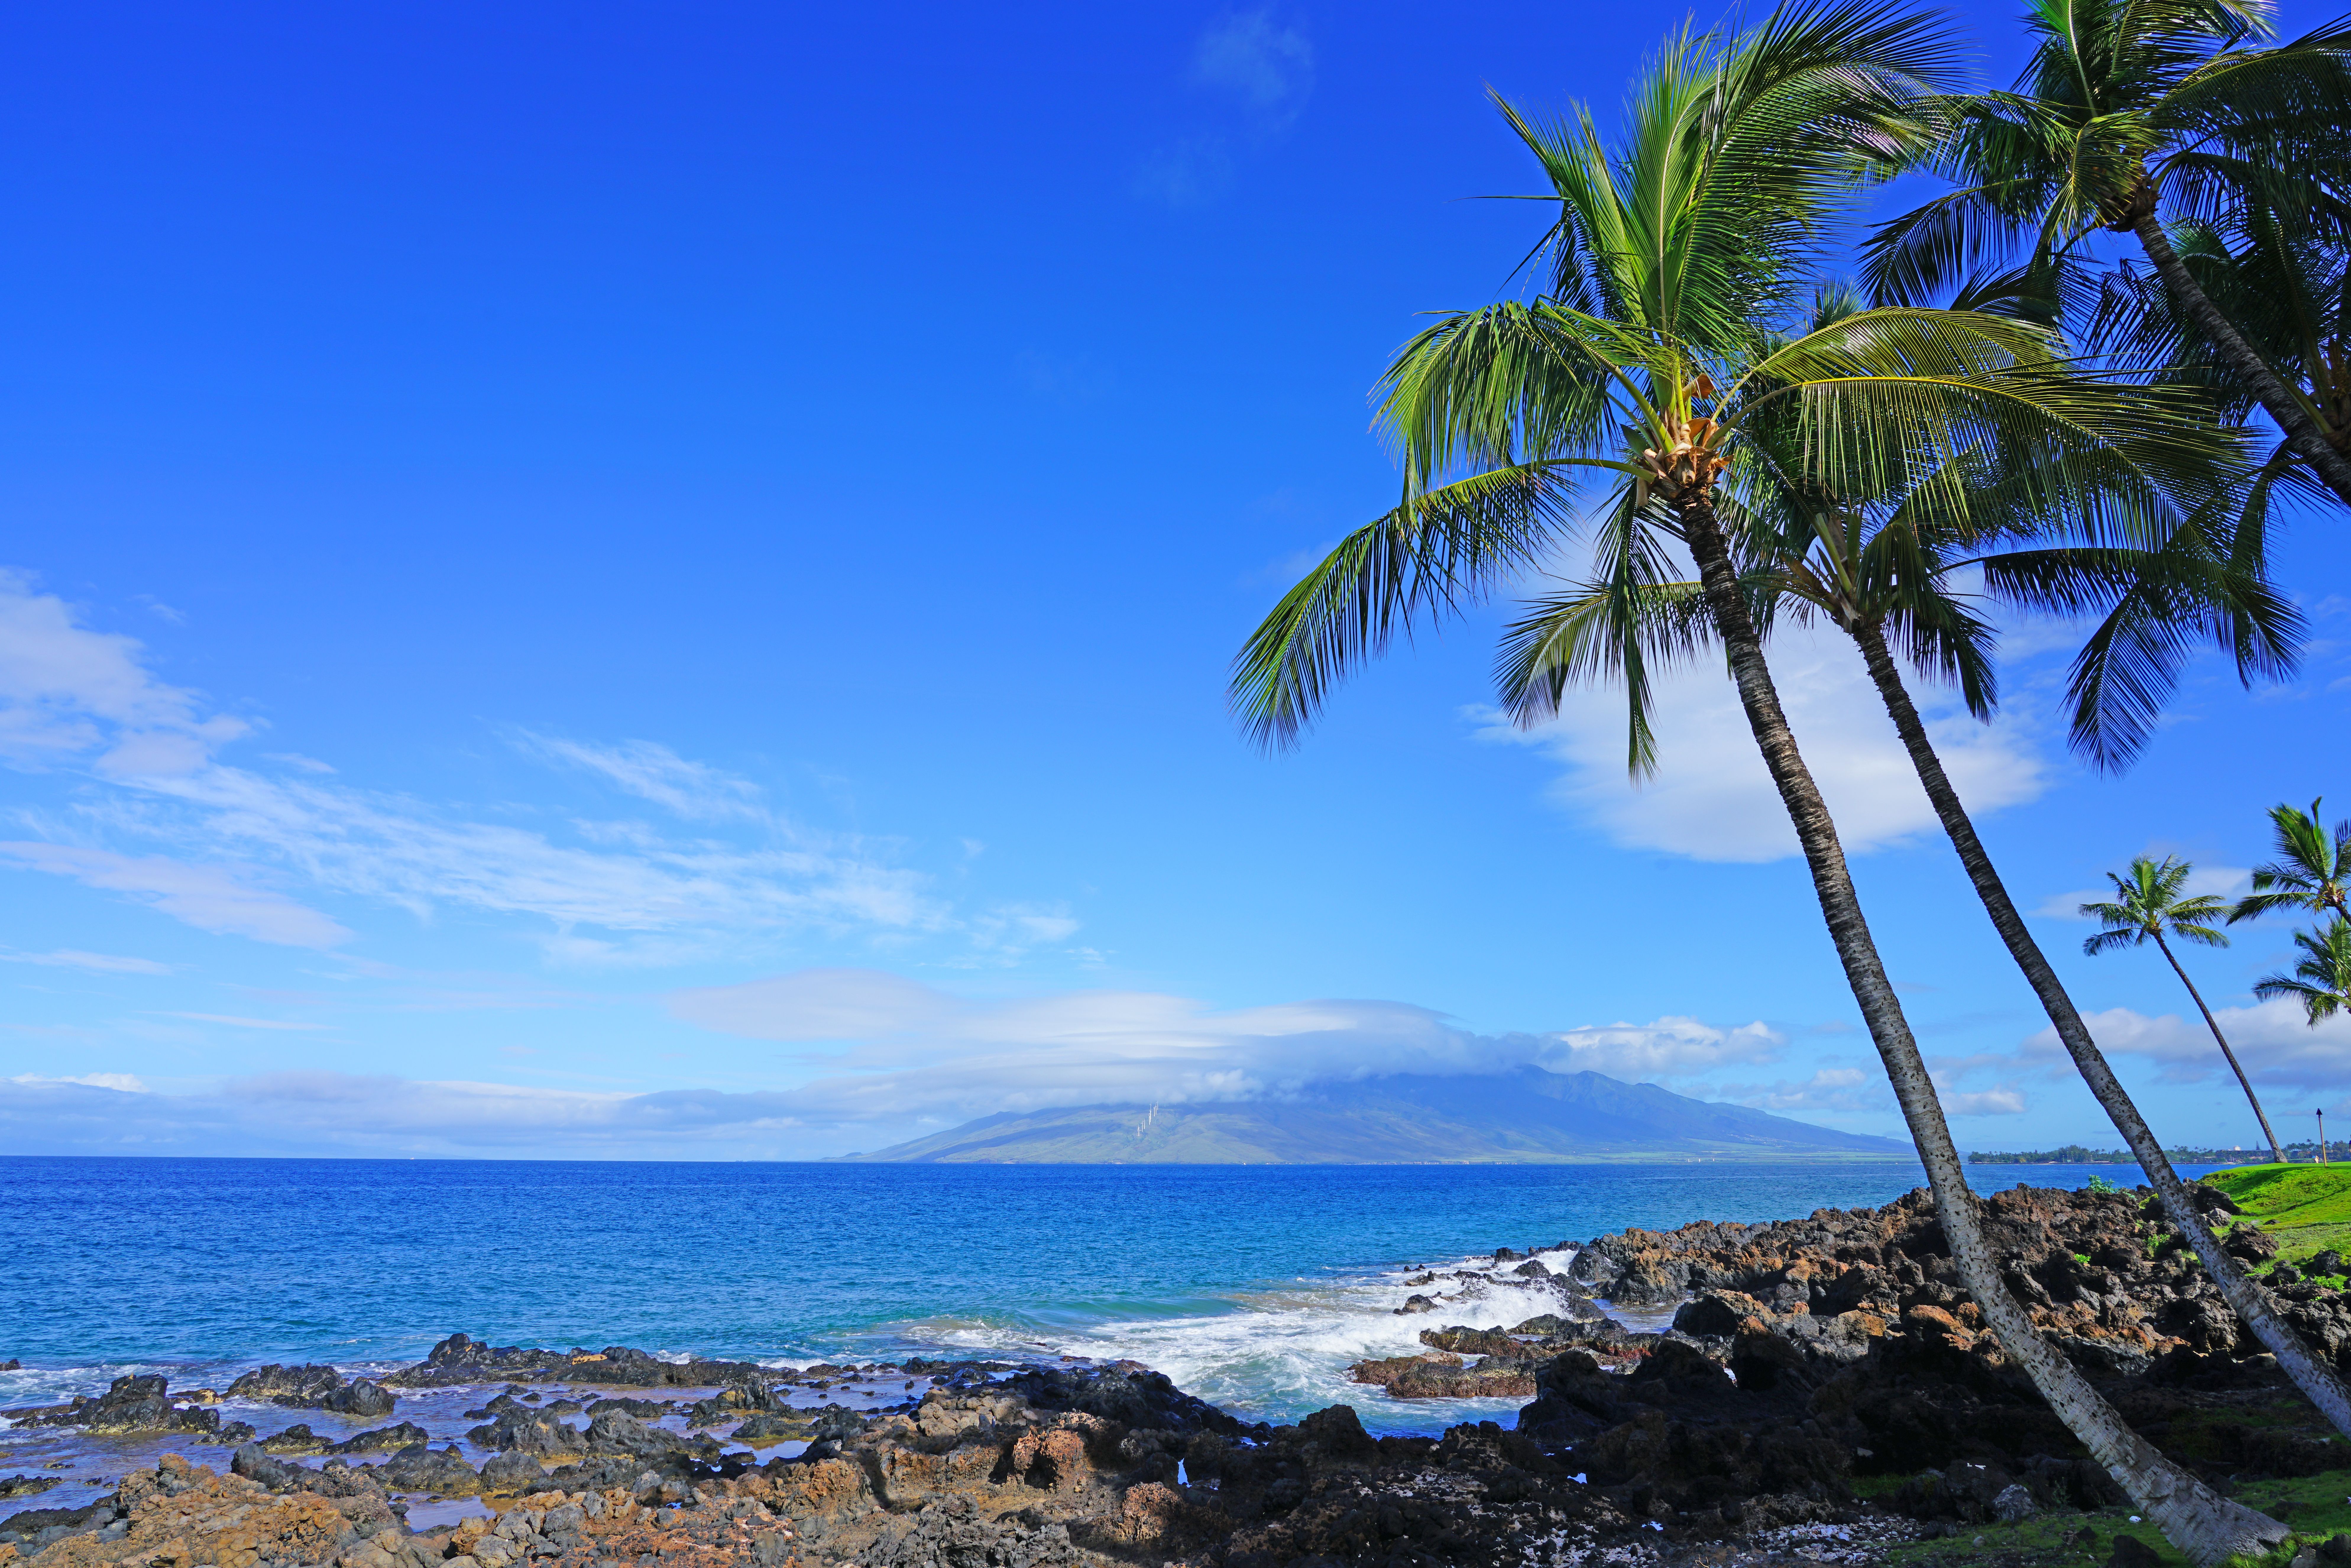 View of palm trees and black lava rock on the beach in Wailea 